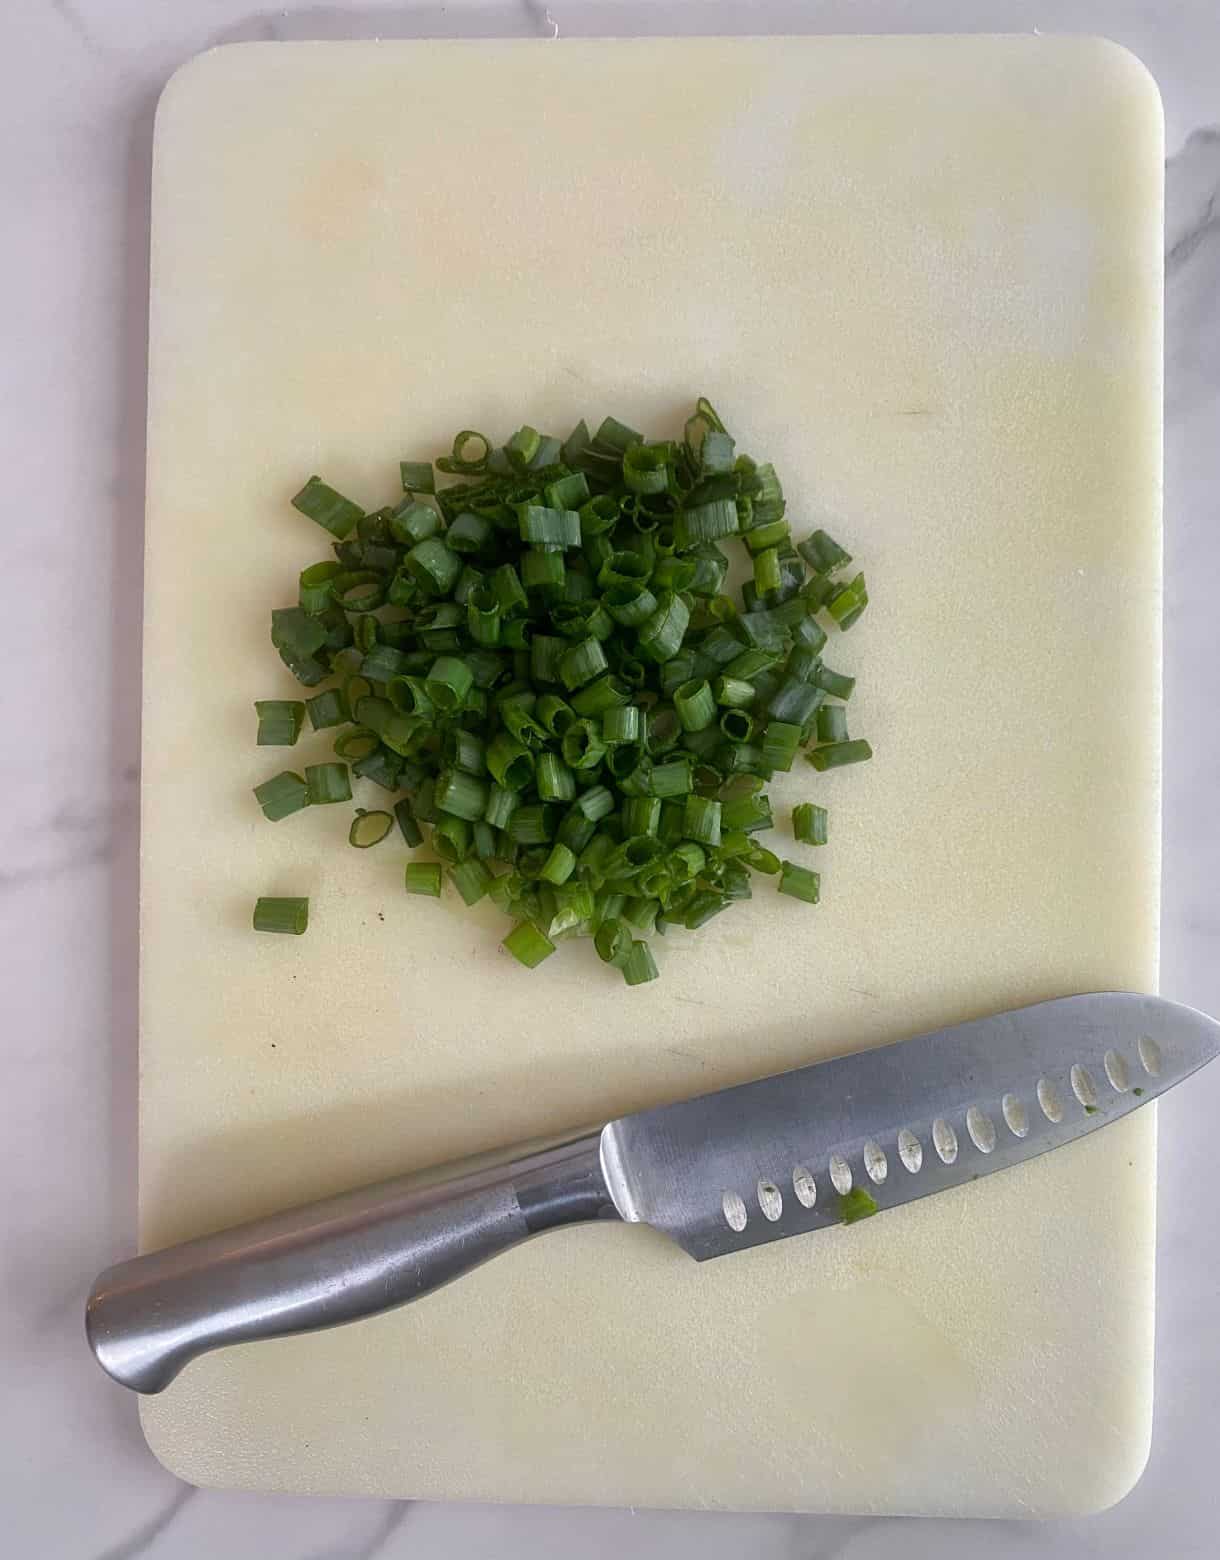 A cutting board with a knife and sliced scallions.